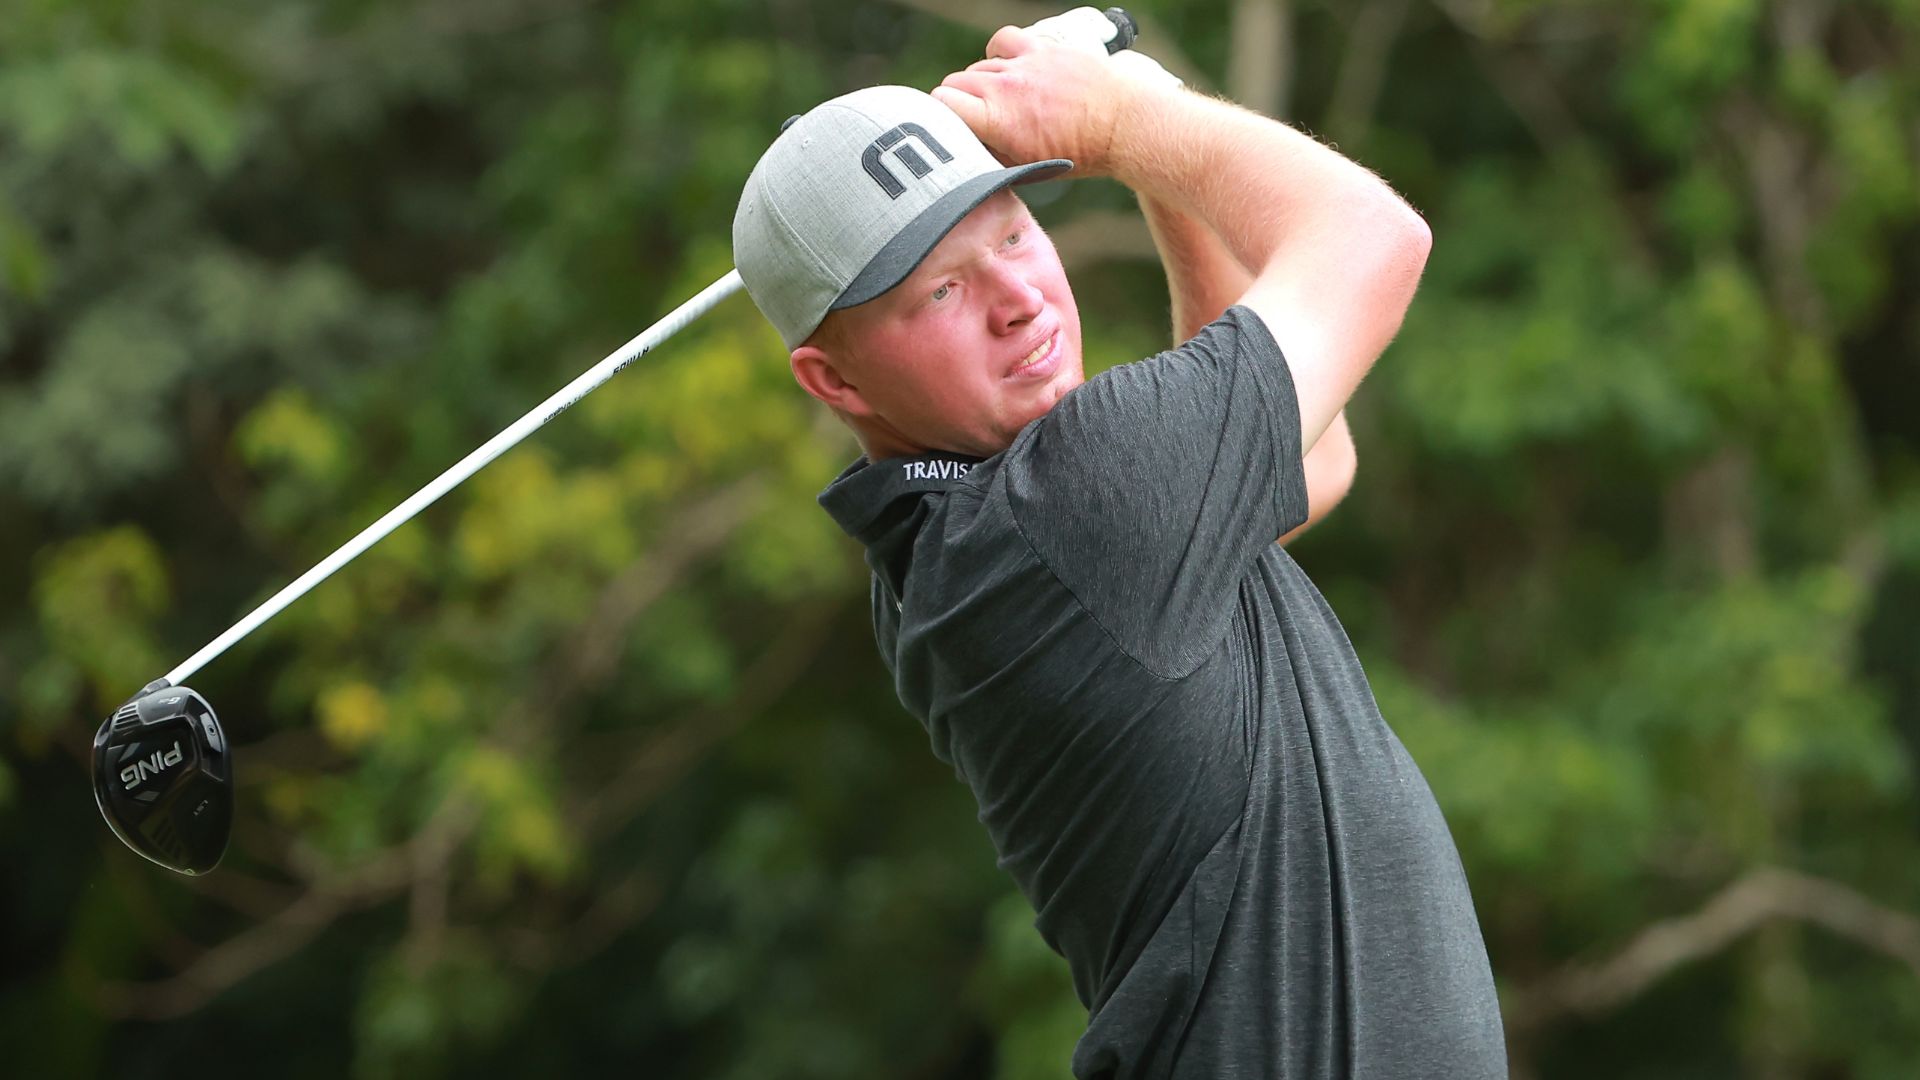 After last week’s woes in Tour debut, Travis Vick (68) in mix in hometown event at Houston Open